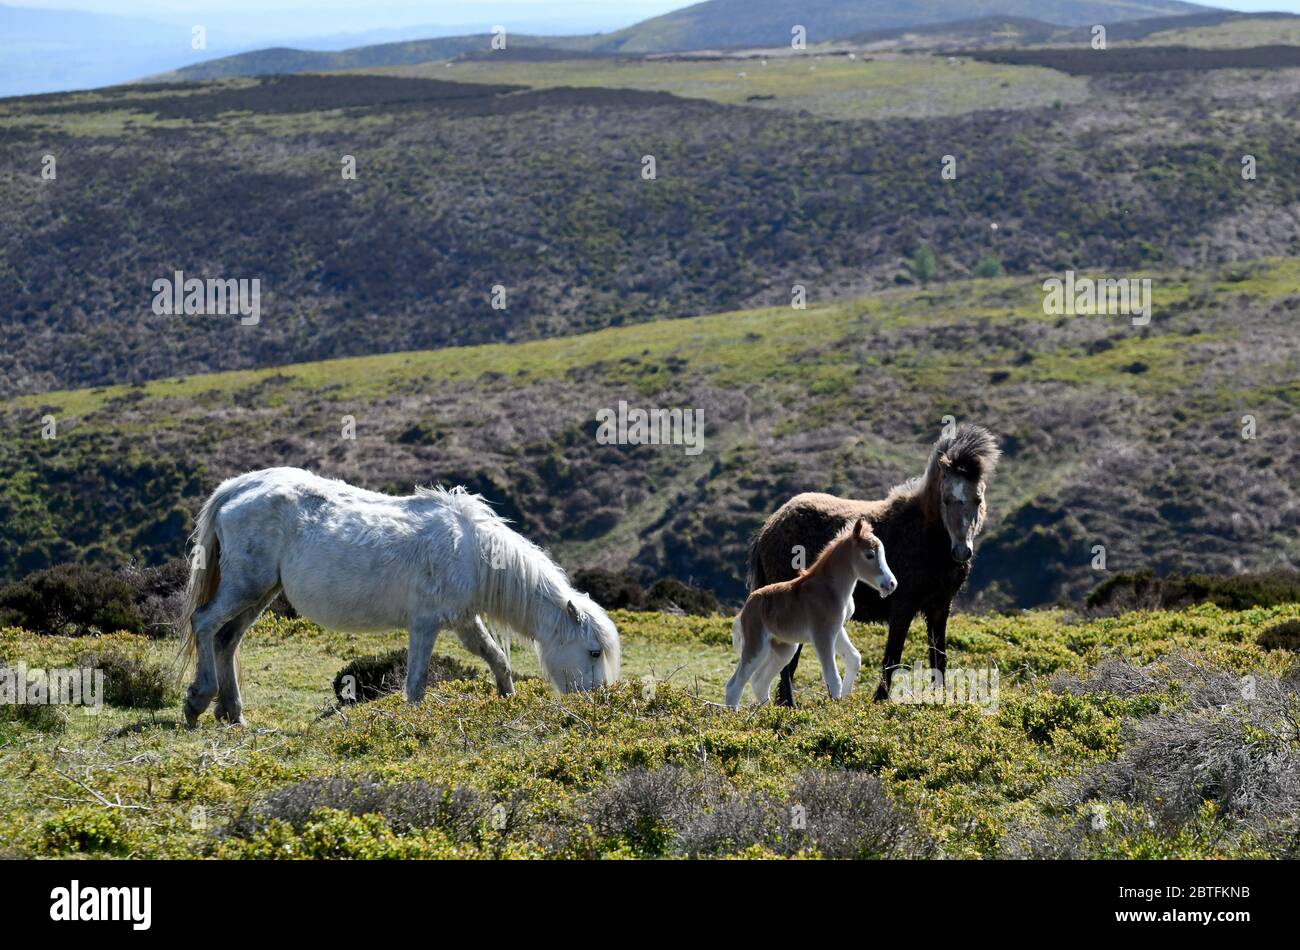 The Long Mynd, Church Stretton, Shropshire, Uk  May 25th 2020. Out for a bank holiday stroll with mum and dad, this 3 day old foal was one the wild ponies enjoyng the holiday weather on the Shropshire hills. Stock Photo